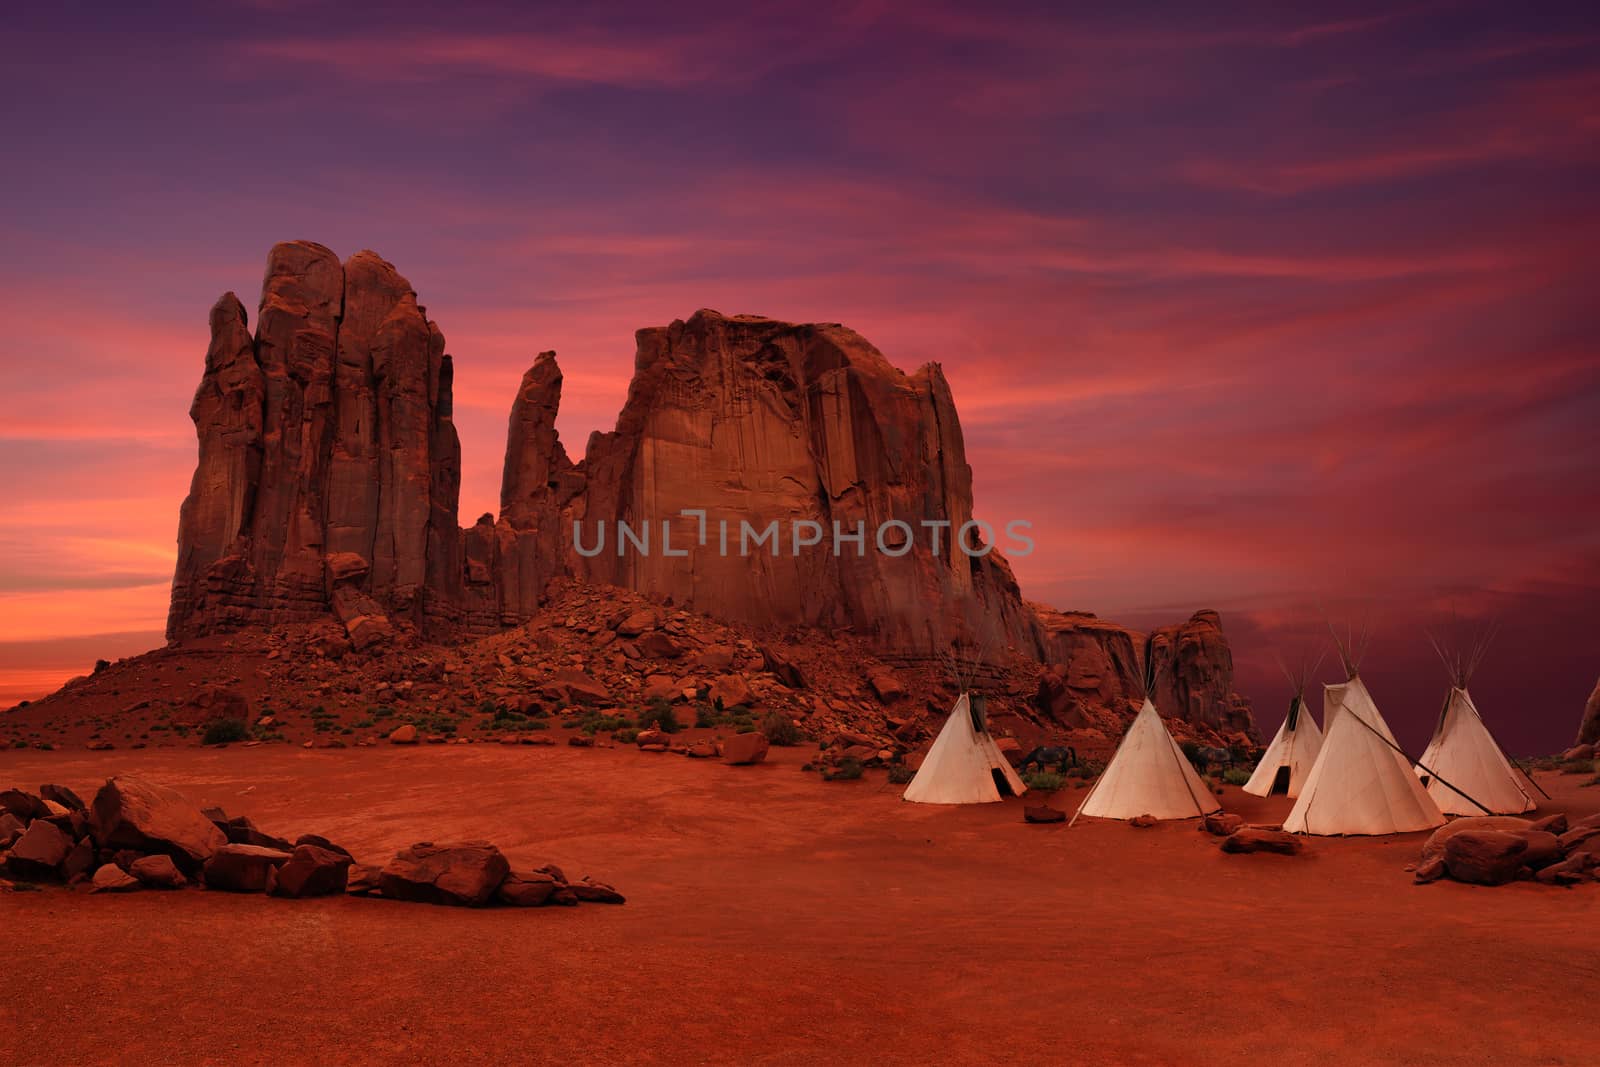 Wigwams/tepees of native Americans in Monument Valley at sunset, Arizona-Utah border, USA